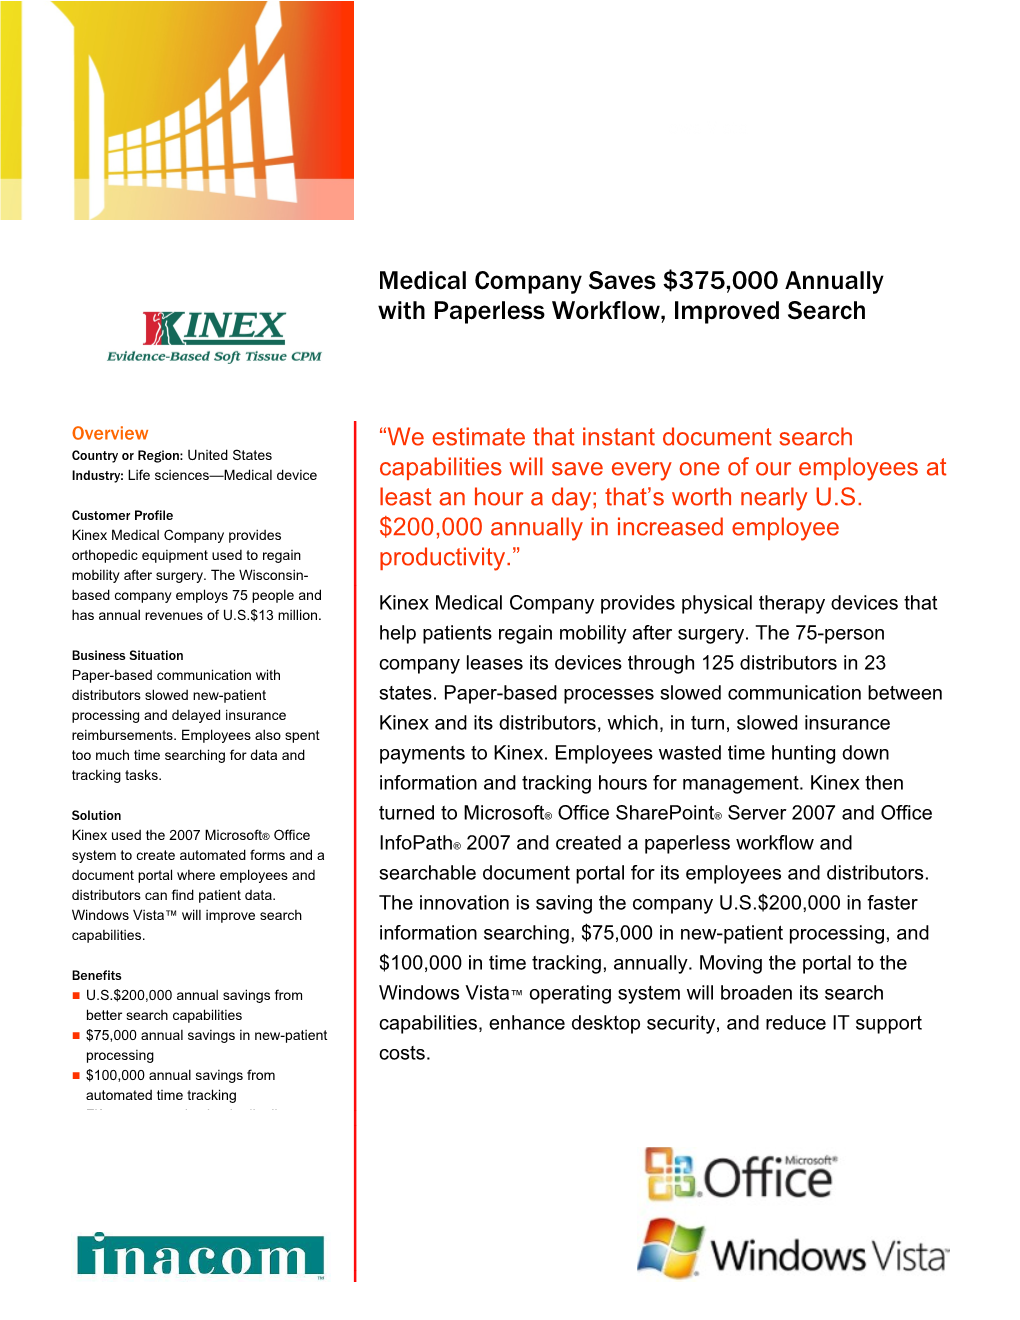 Medical Company Saves $375,000 Annually with Paperless Workflow, Improved Search